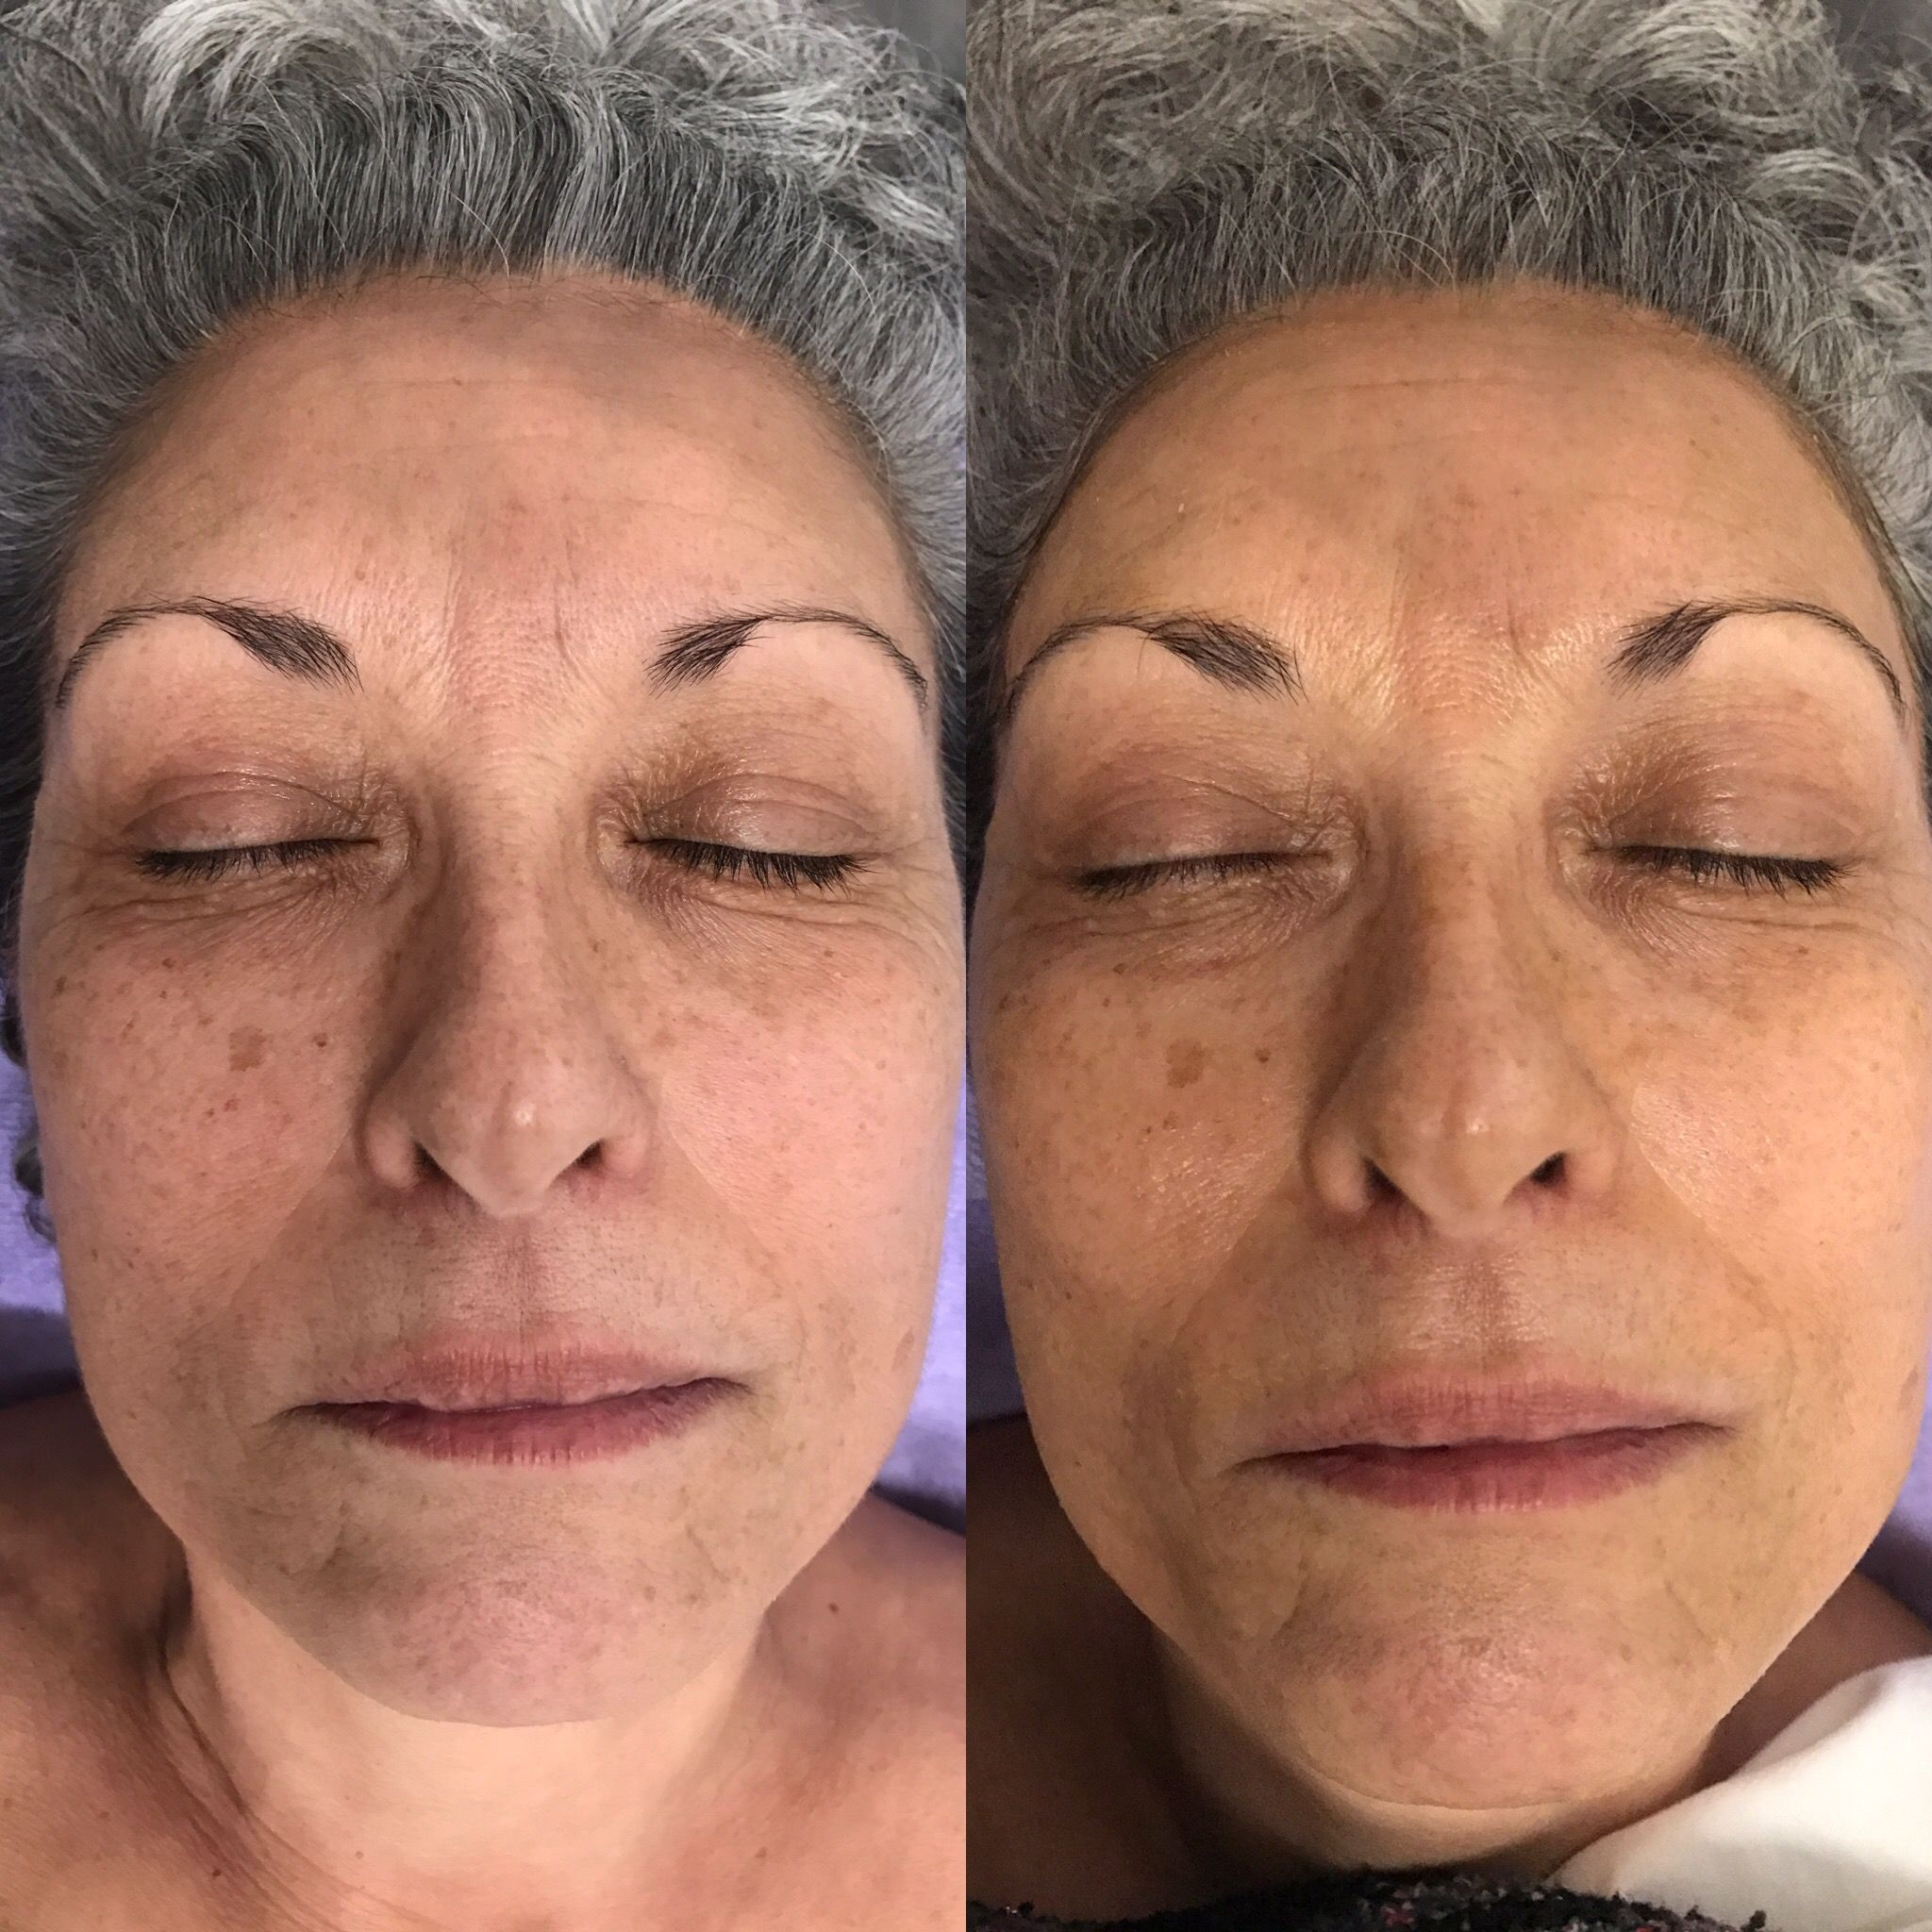 Dermaplane facial before and after results photos - Woodlands TX